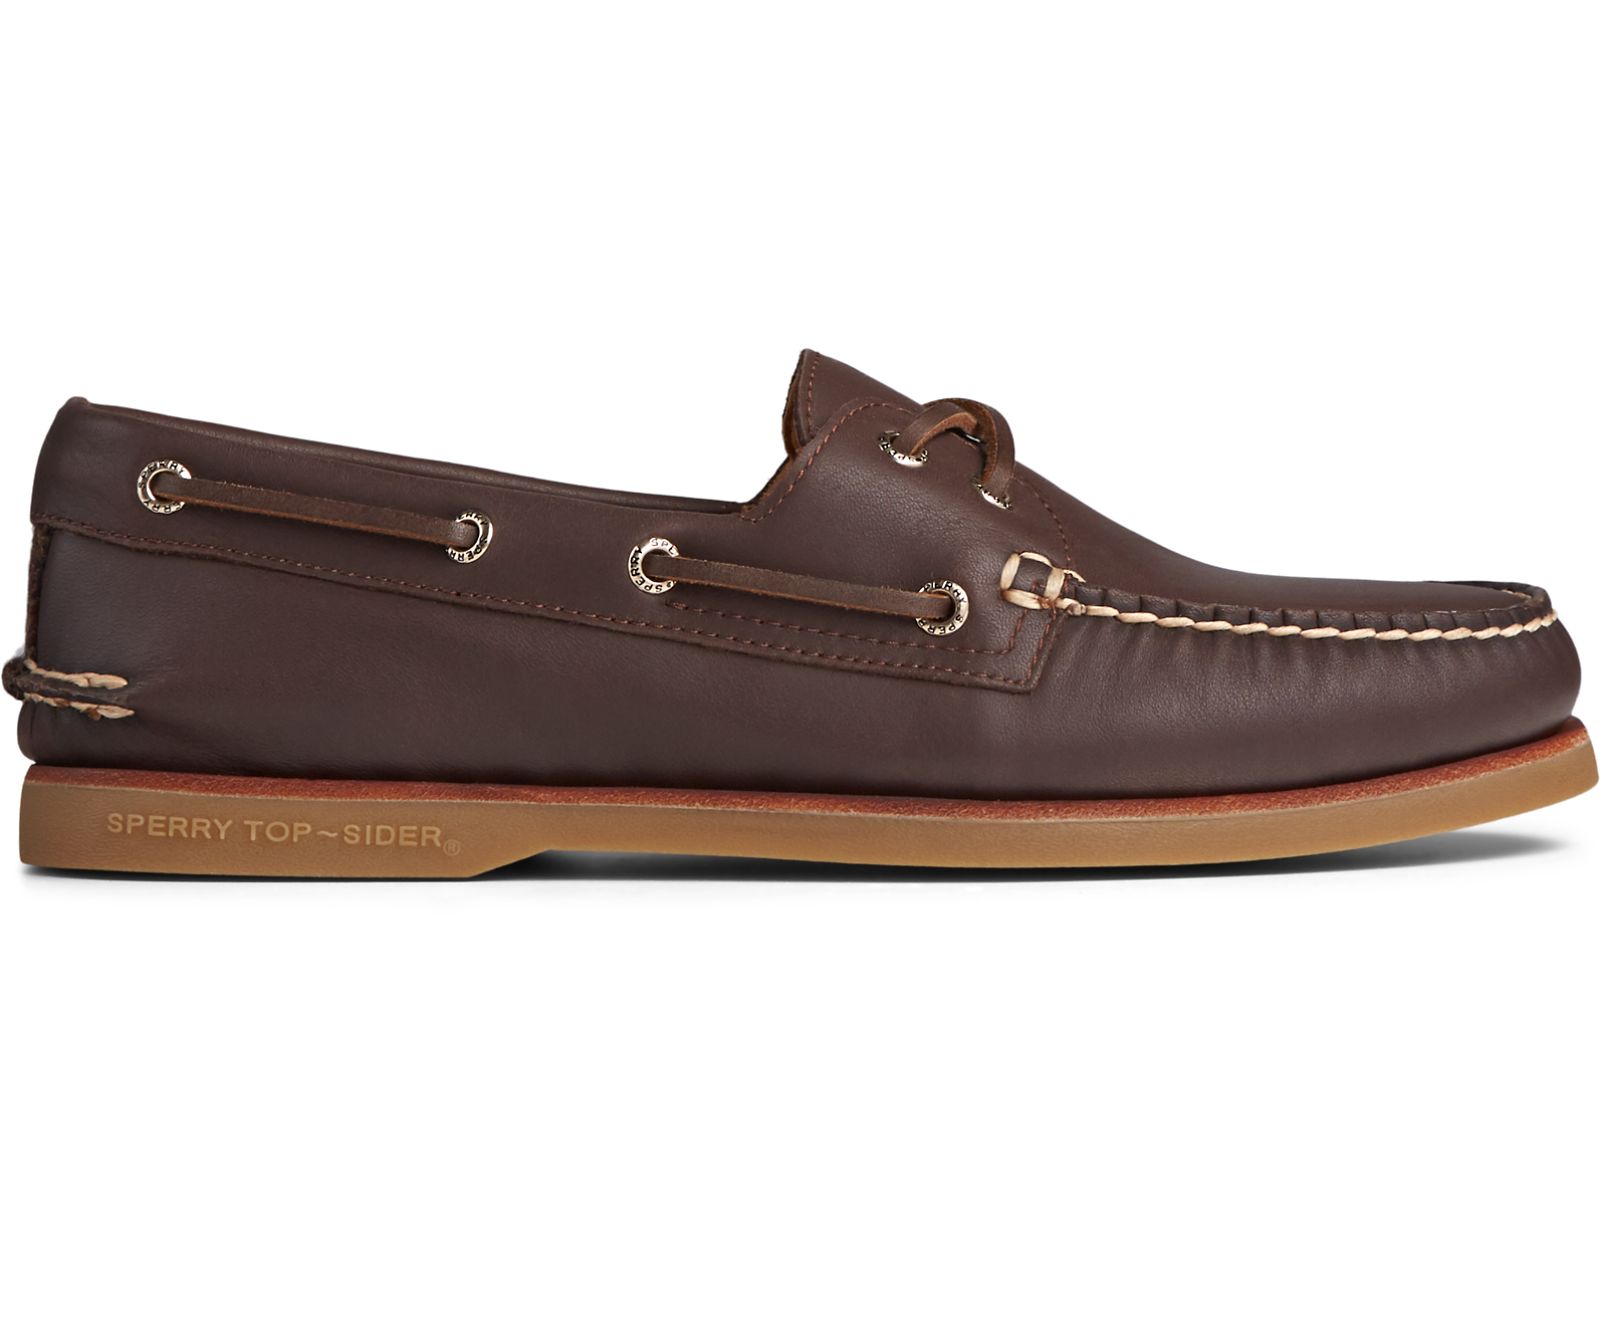 Men's Gold Cup Authentic Original Glove Leather Boat Shoe - Brown